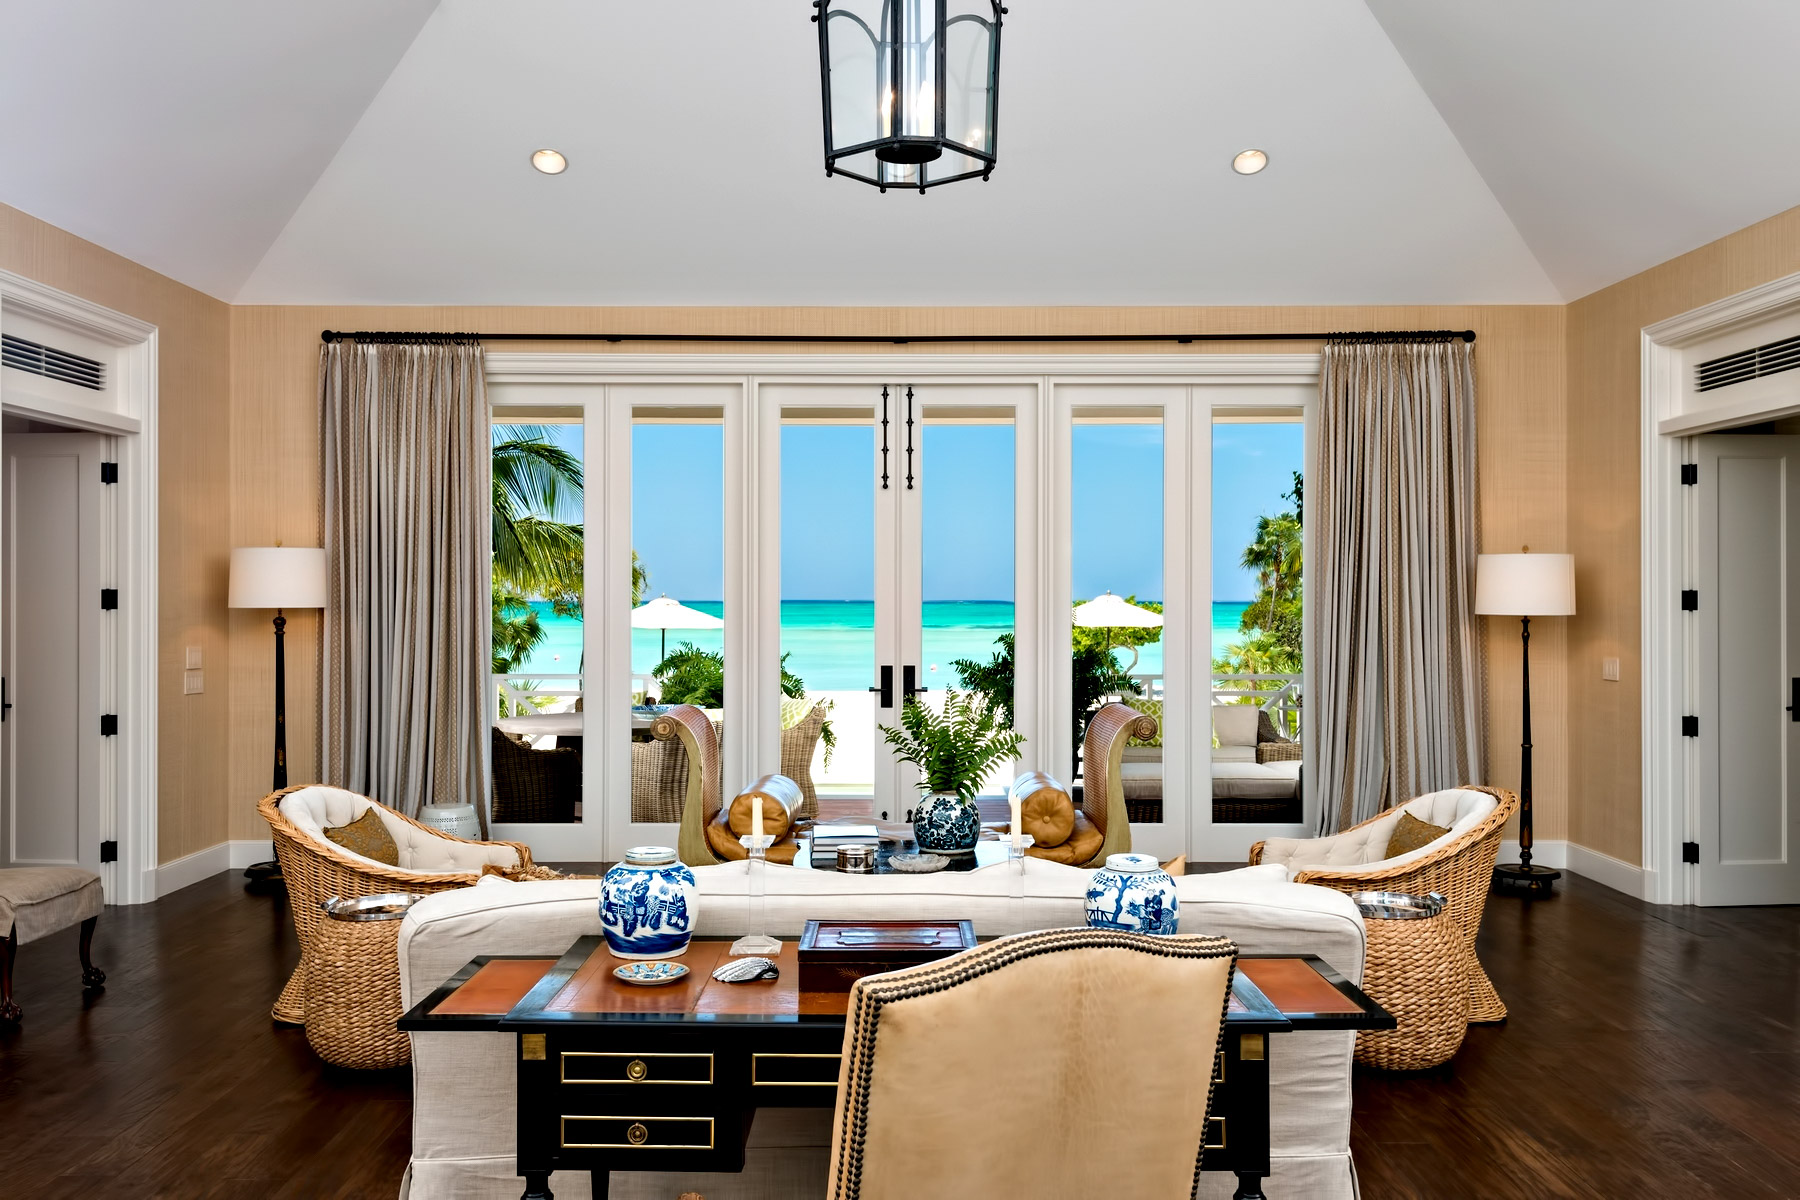 Oliver’s Cove Luxury Estate – Parrot Cay, Turks and Caicos Islands